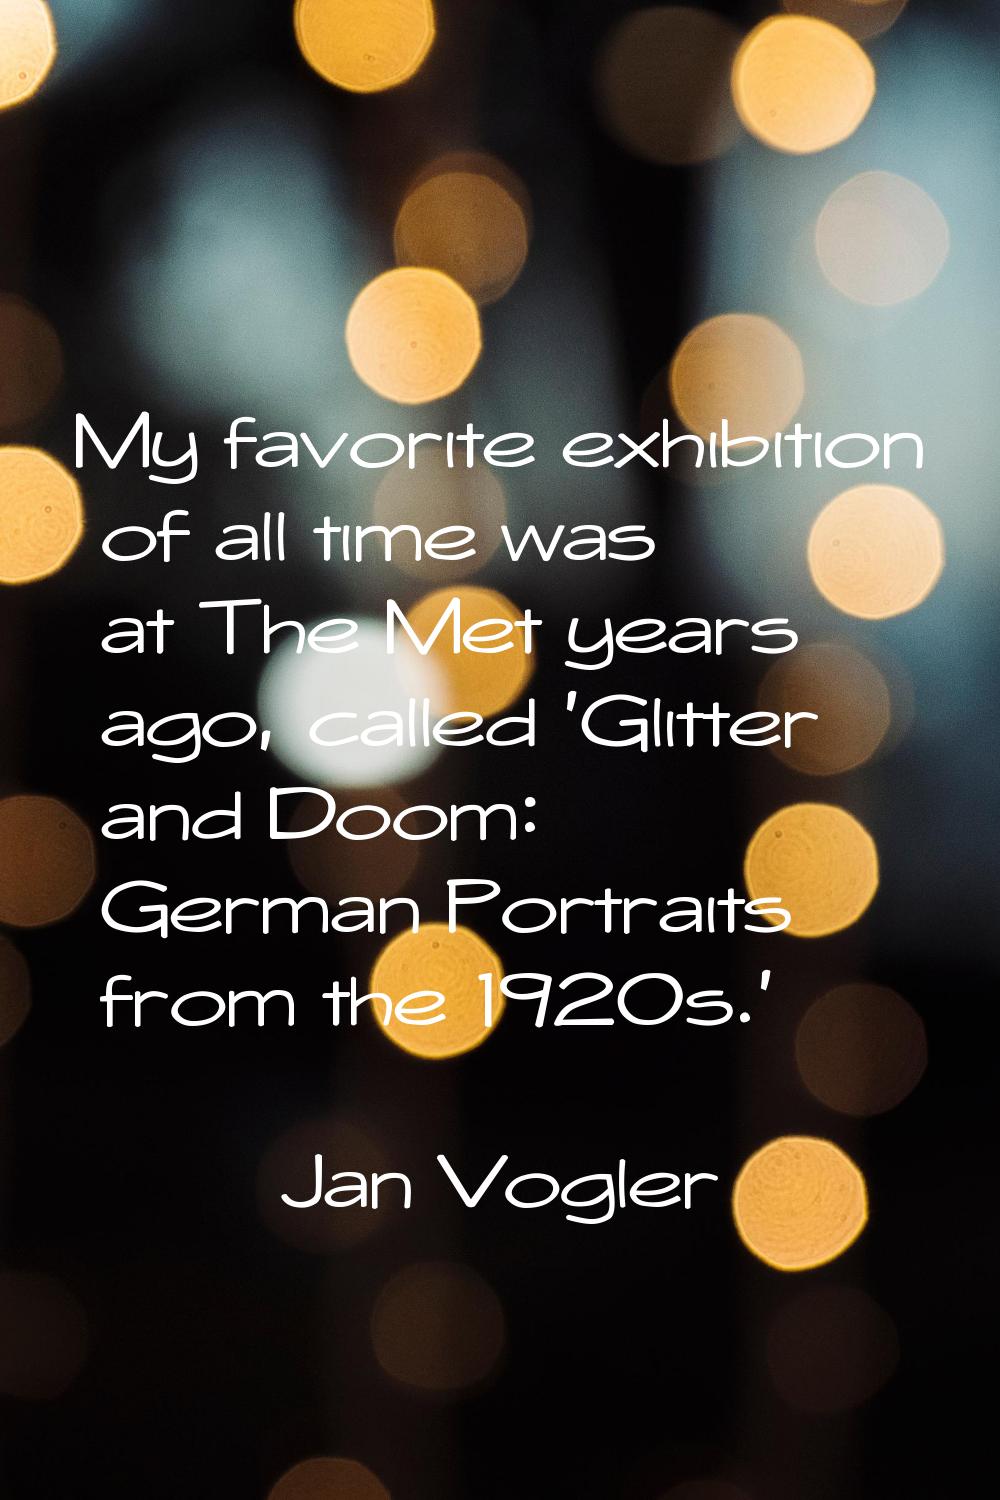 My favorite exhibition of all time was at The Met years ago, called 'Glitter and Doom: German Portr